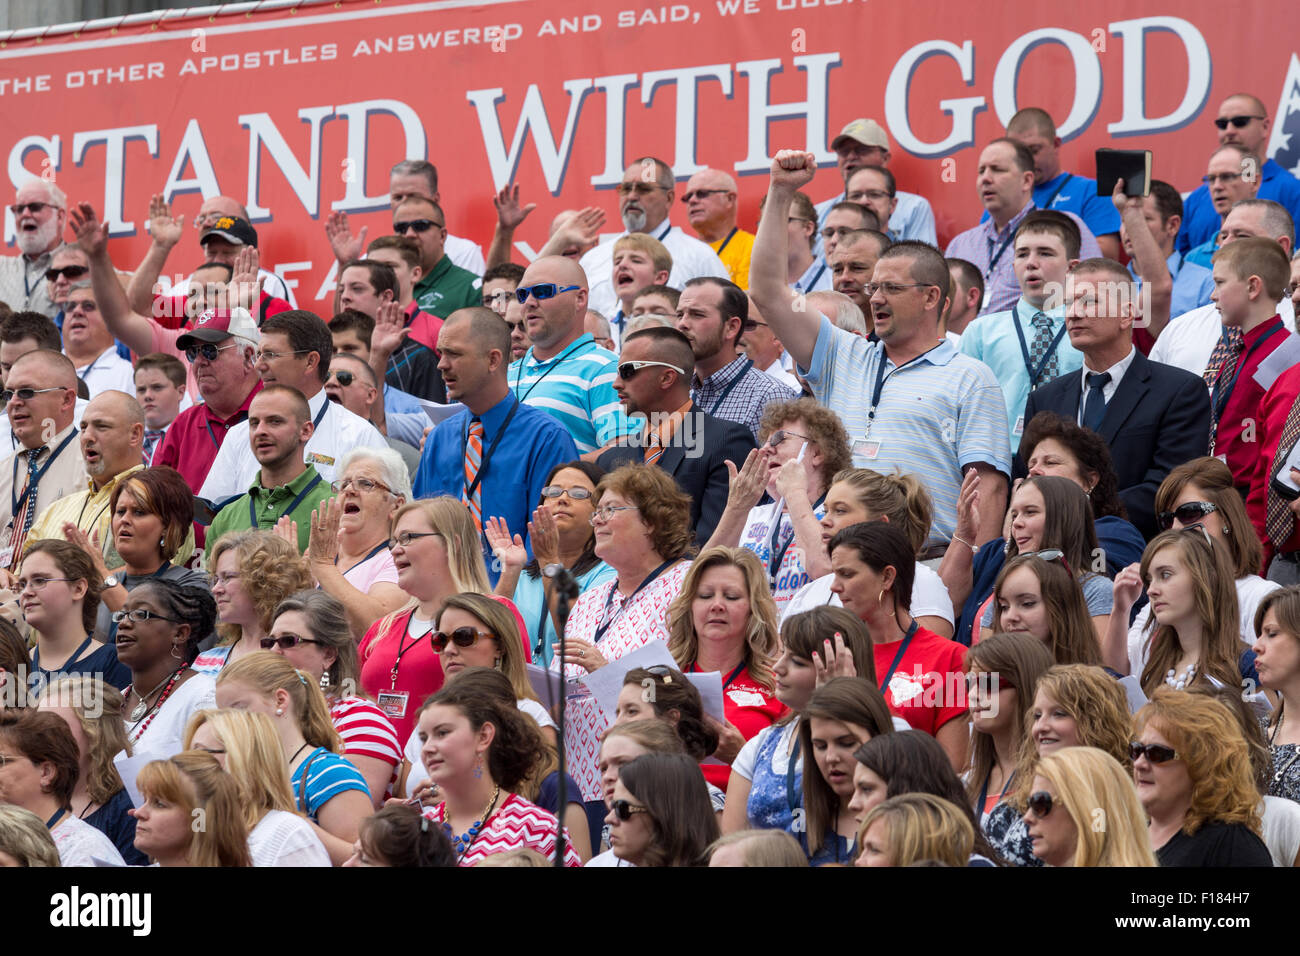 Evangelical Christians gather for the 'Stand With God' rally August 29, 2015 in Columbia, SC. Thousands of conservative christians gathered at the State House to rally against gay marriage and listen to GOP presidential candidates Gov. Rick Perry and Sen. Ted Cruz speak. Stock Photo